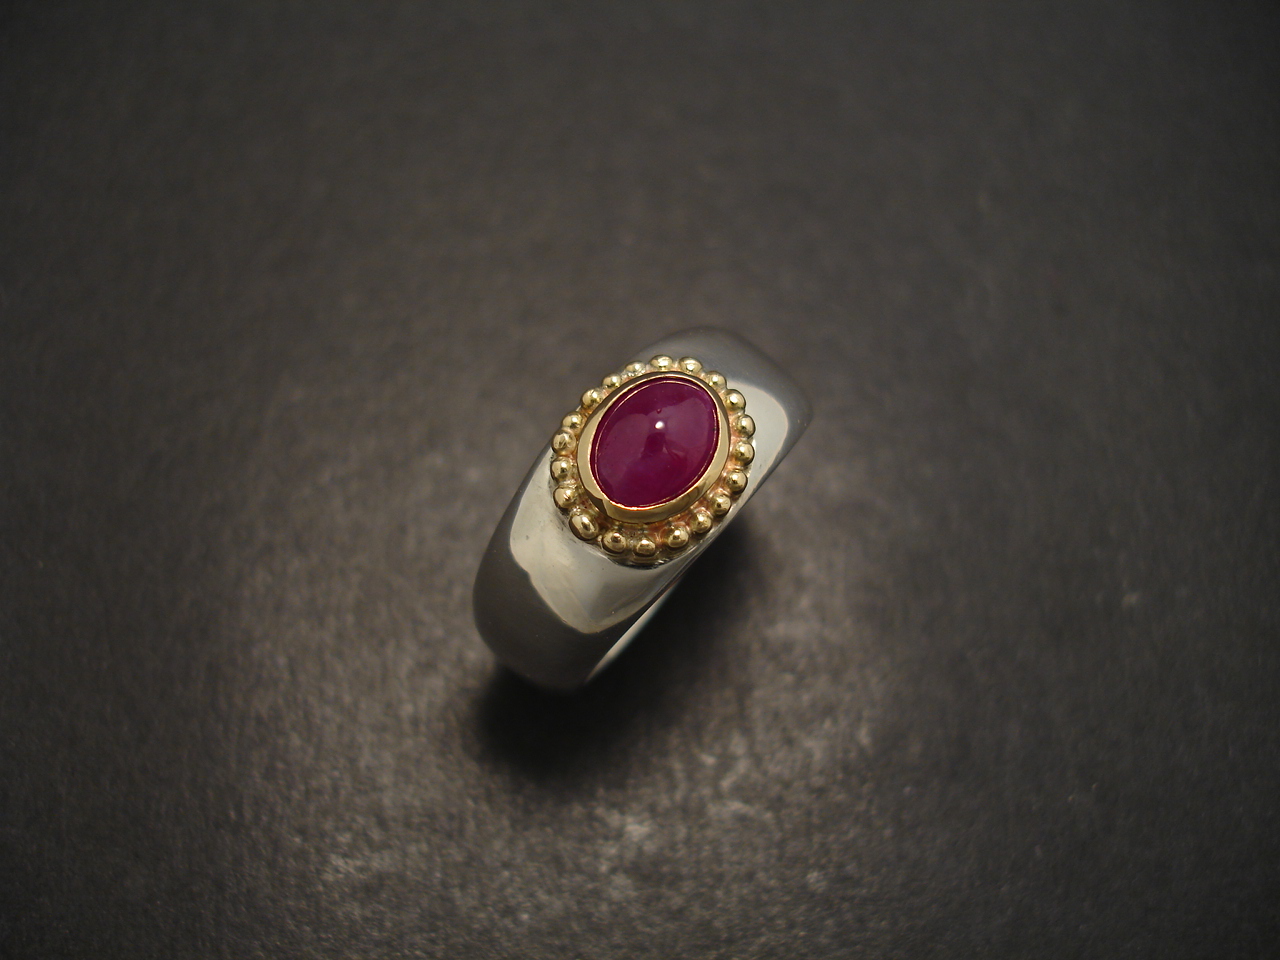 Cabochon Ruby, Gold & Silver Ring - Christopher William Sydney